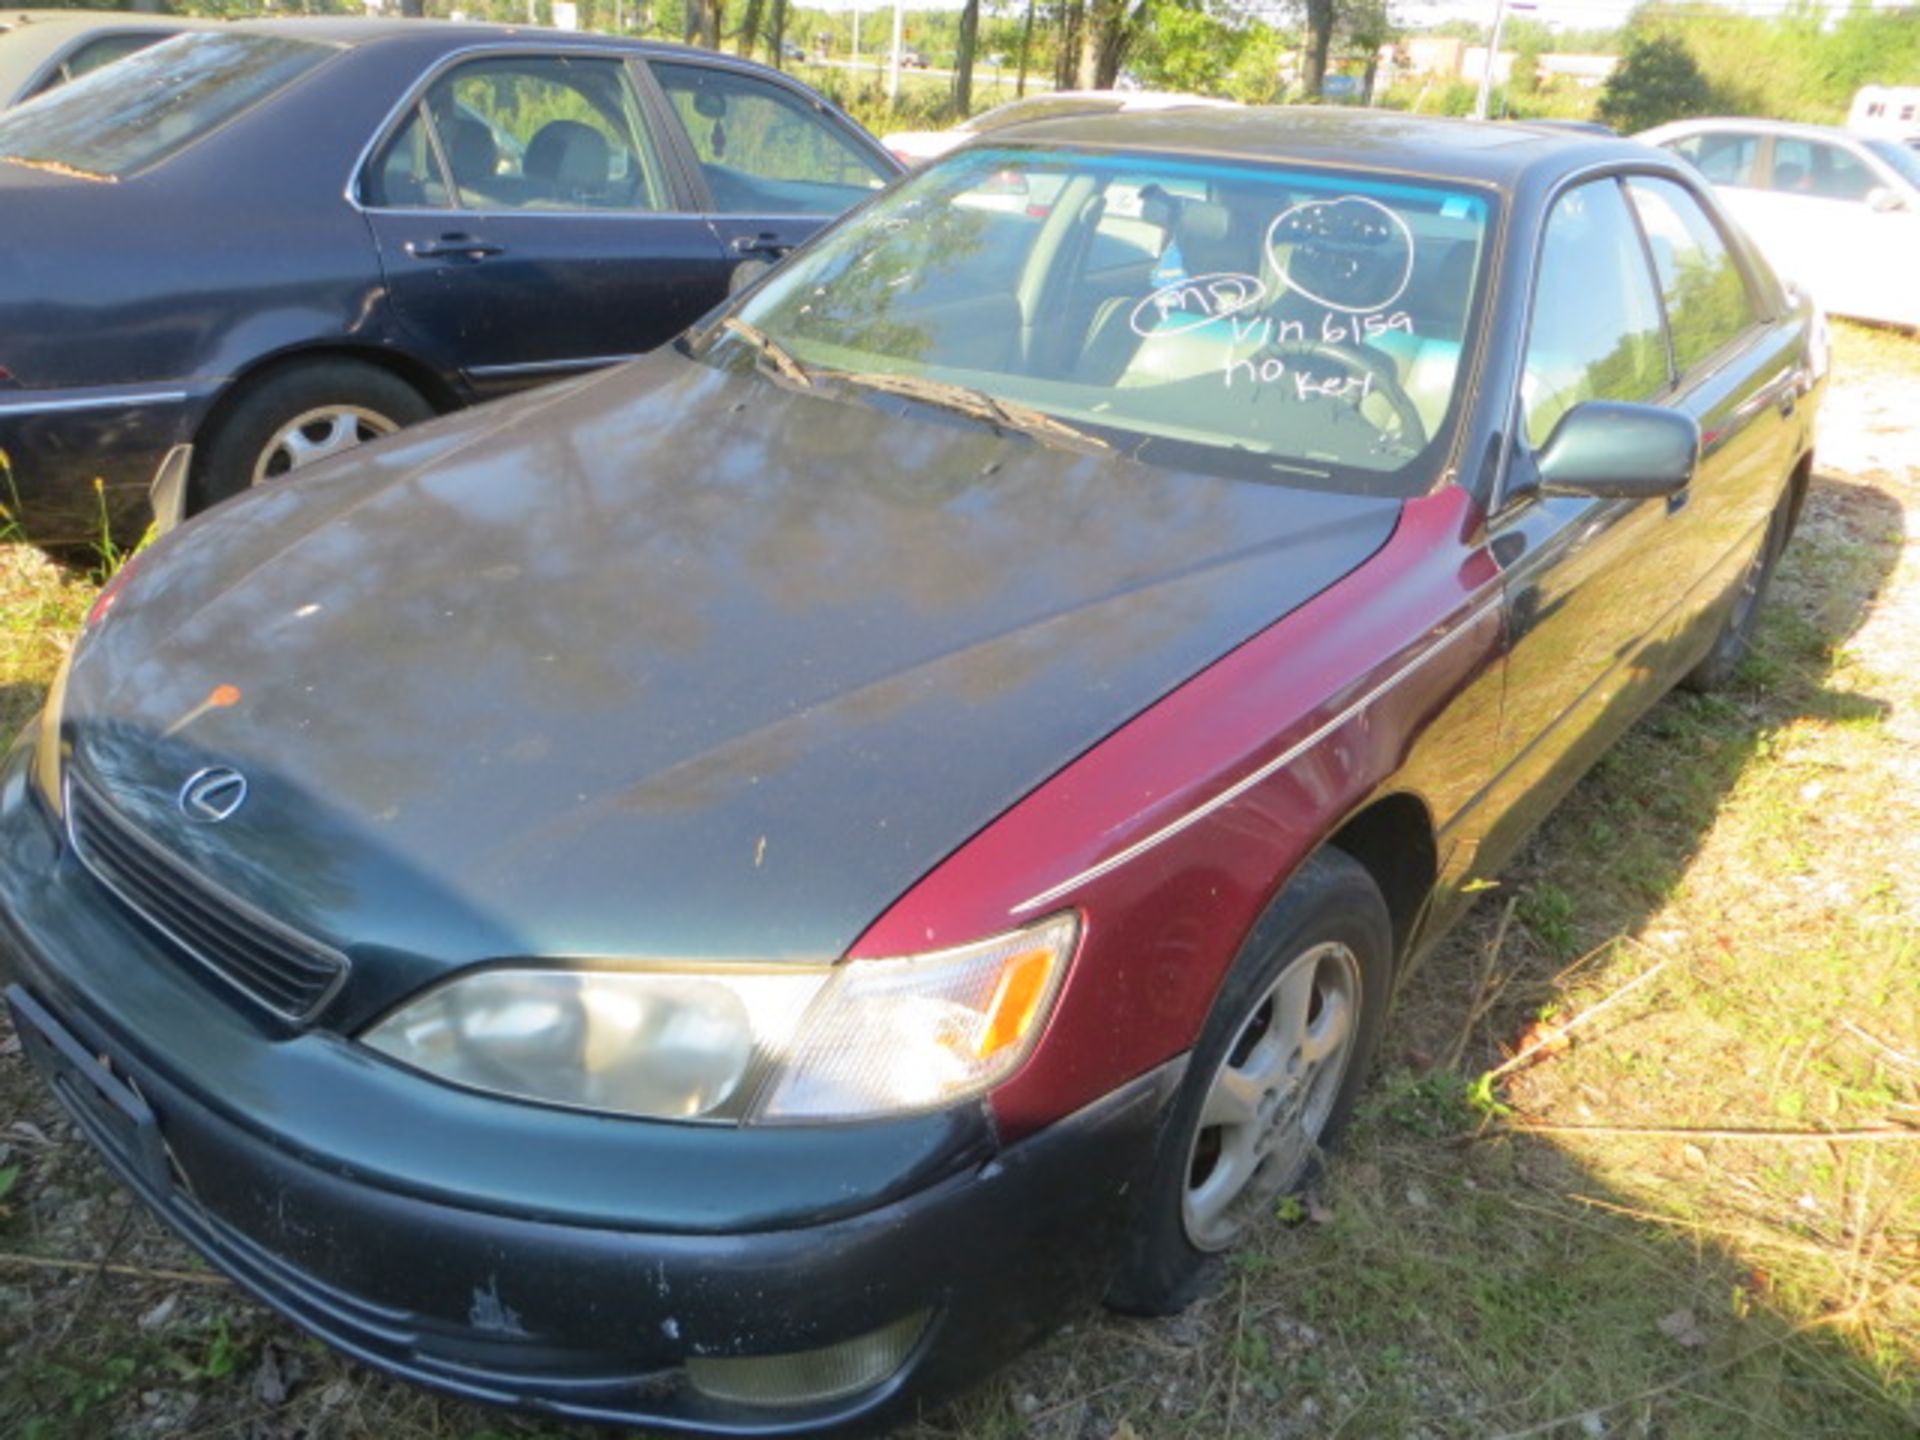 1997 Lexus 300GS-ROUGH UKNOWN MILES,VIN JT8BF22G8V0046159, SOLD WITH GOOD TRANSFERABLE TITLE